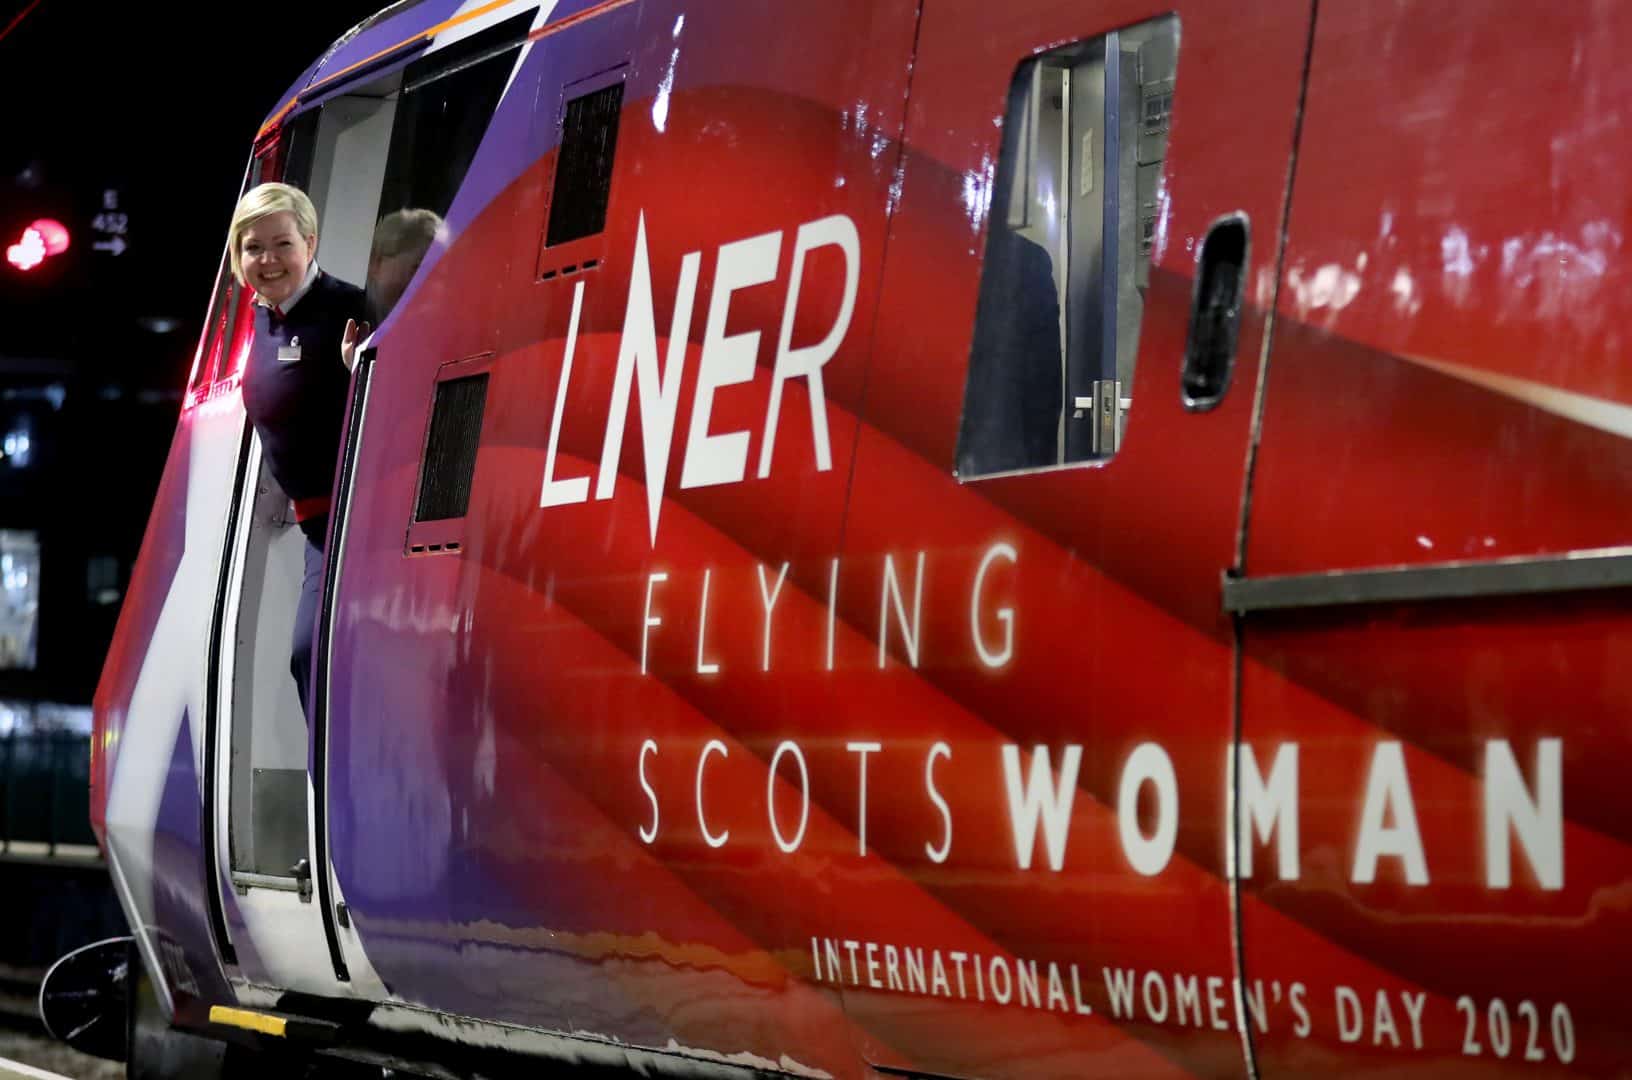 Three trains with all-female crews to mark International Women’s Day